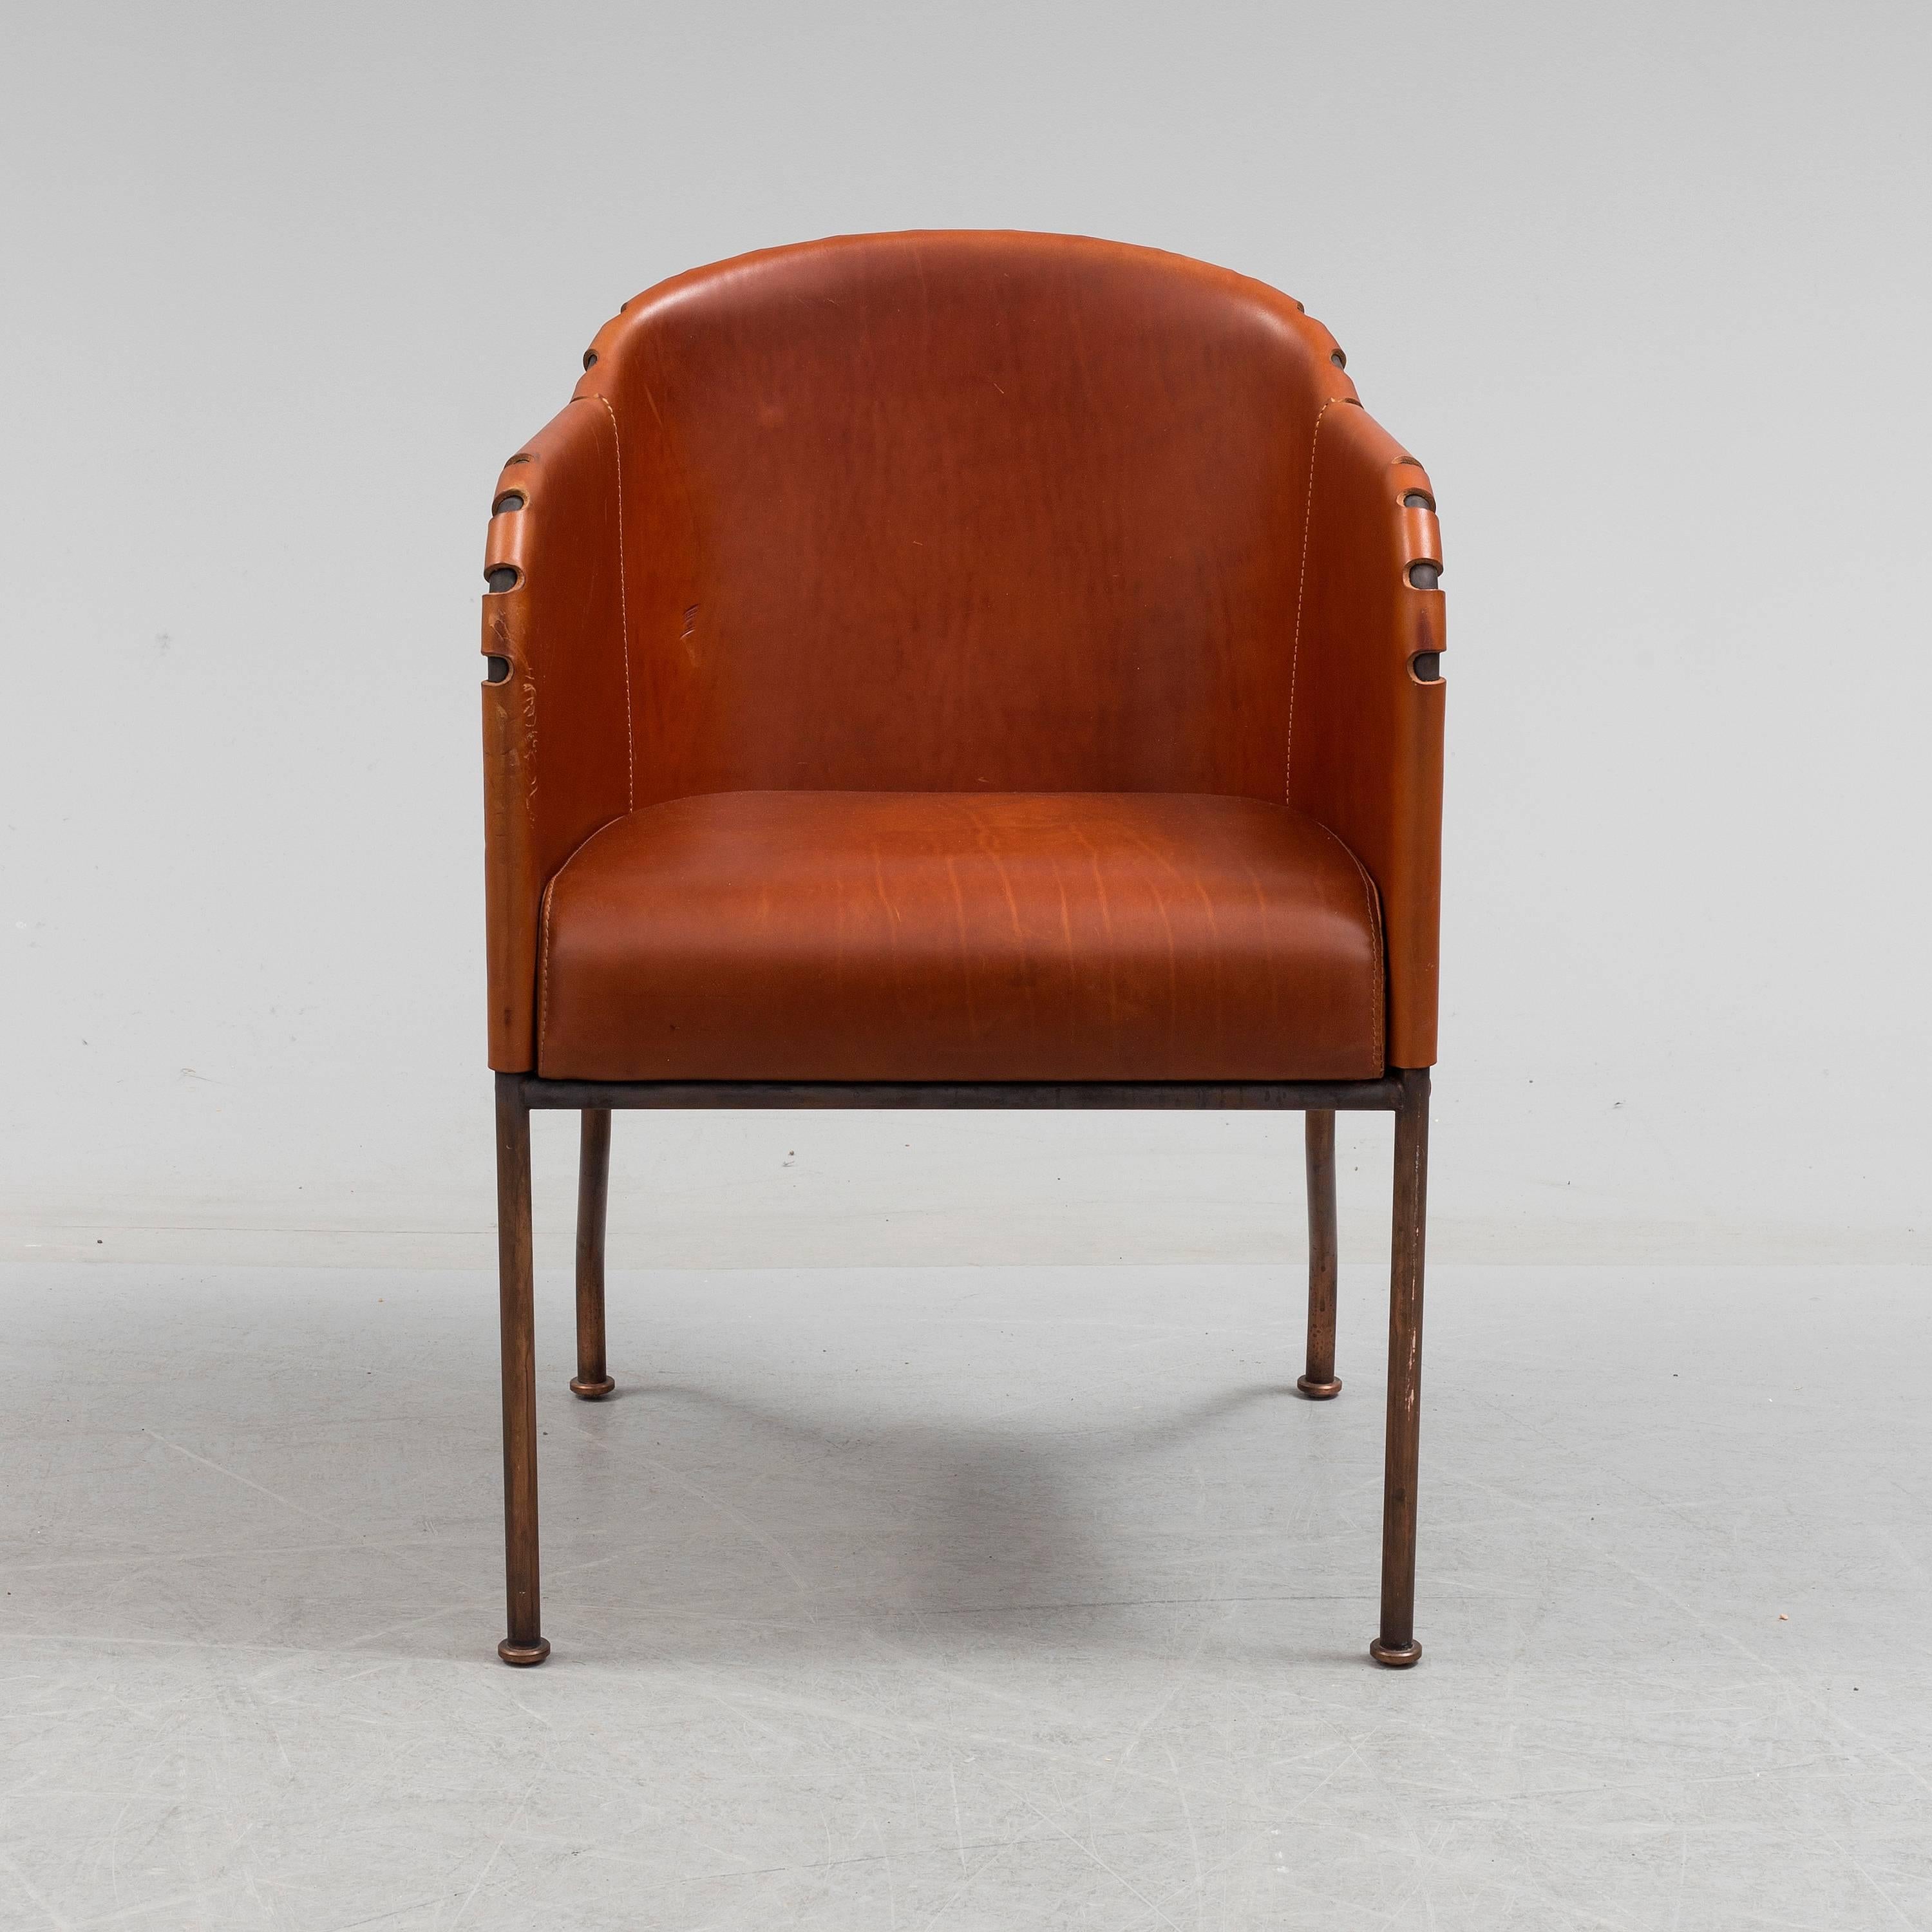 Mats Theselius pair of 'Ambassad' armchairs for Kallemo Sweden, designed and produced in 1999. Made in copper frame and brown Elk leather. 
Six (6) chairs available. Price is per chair.